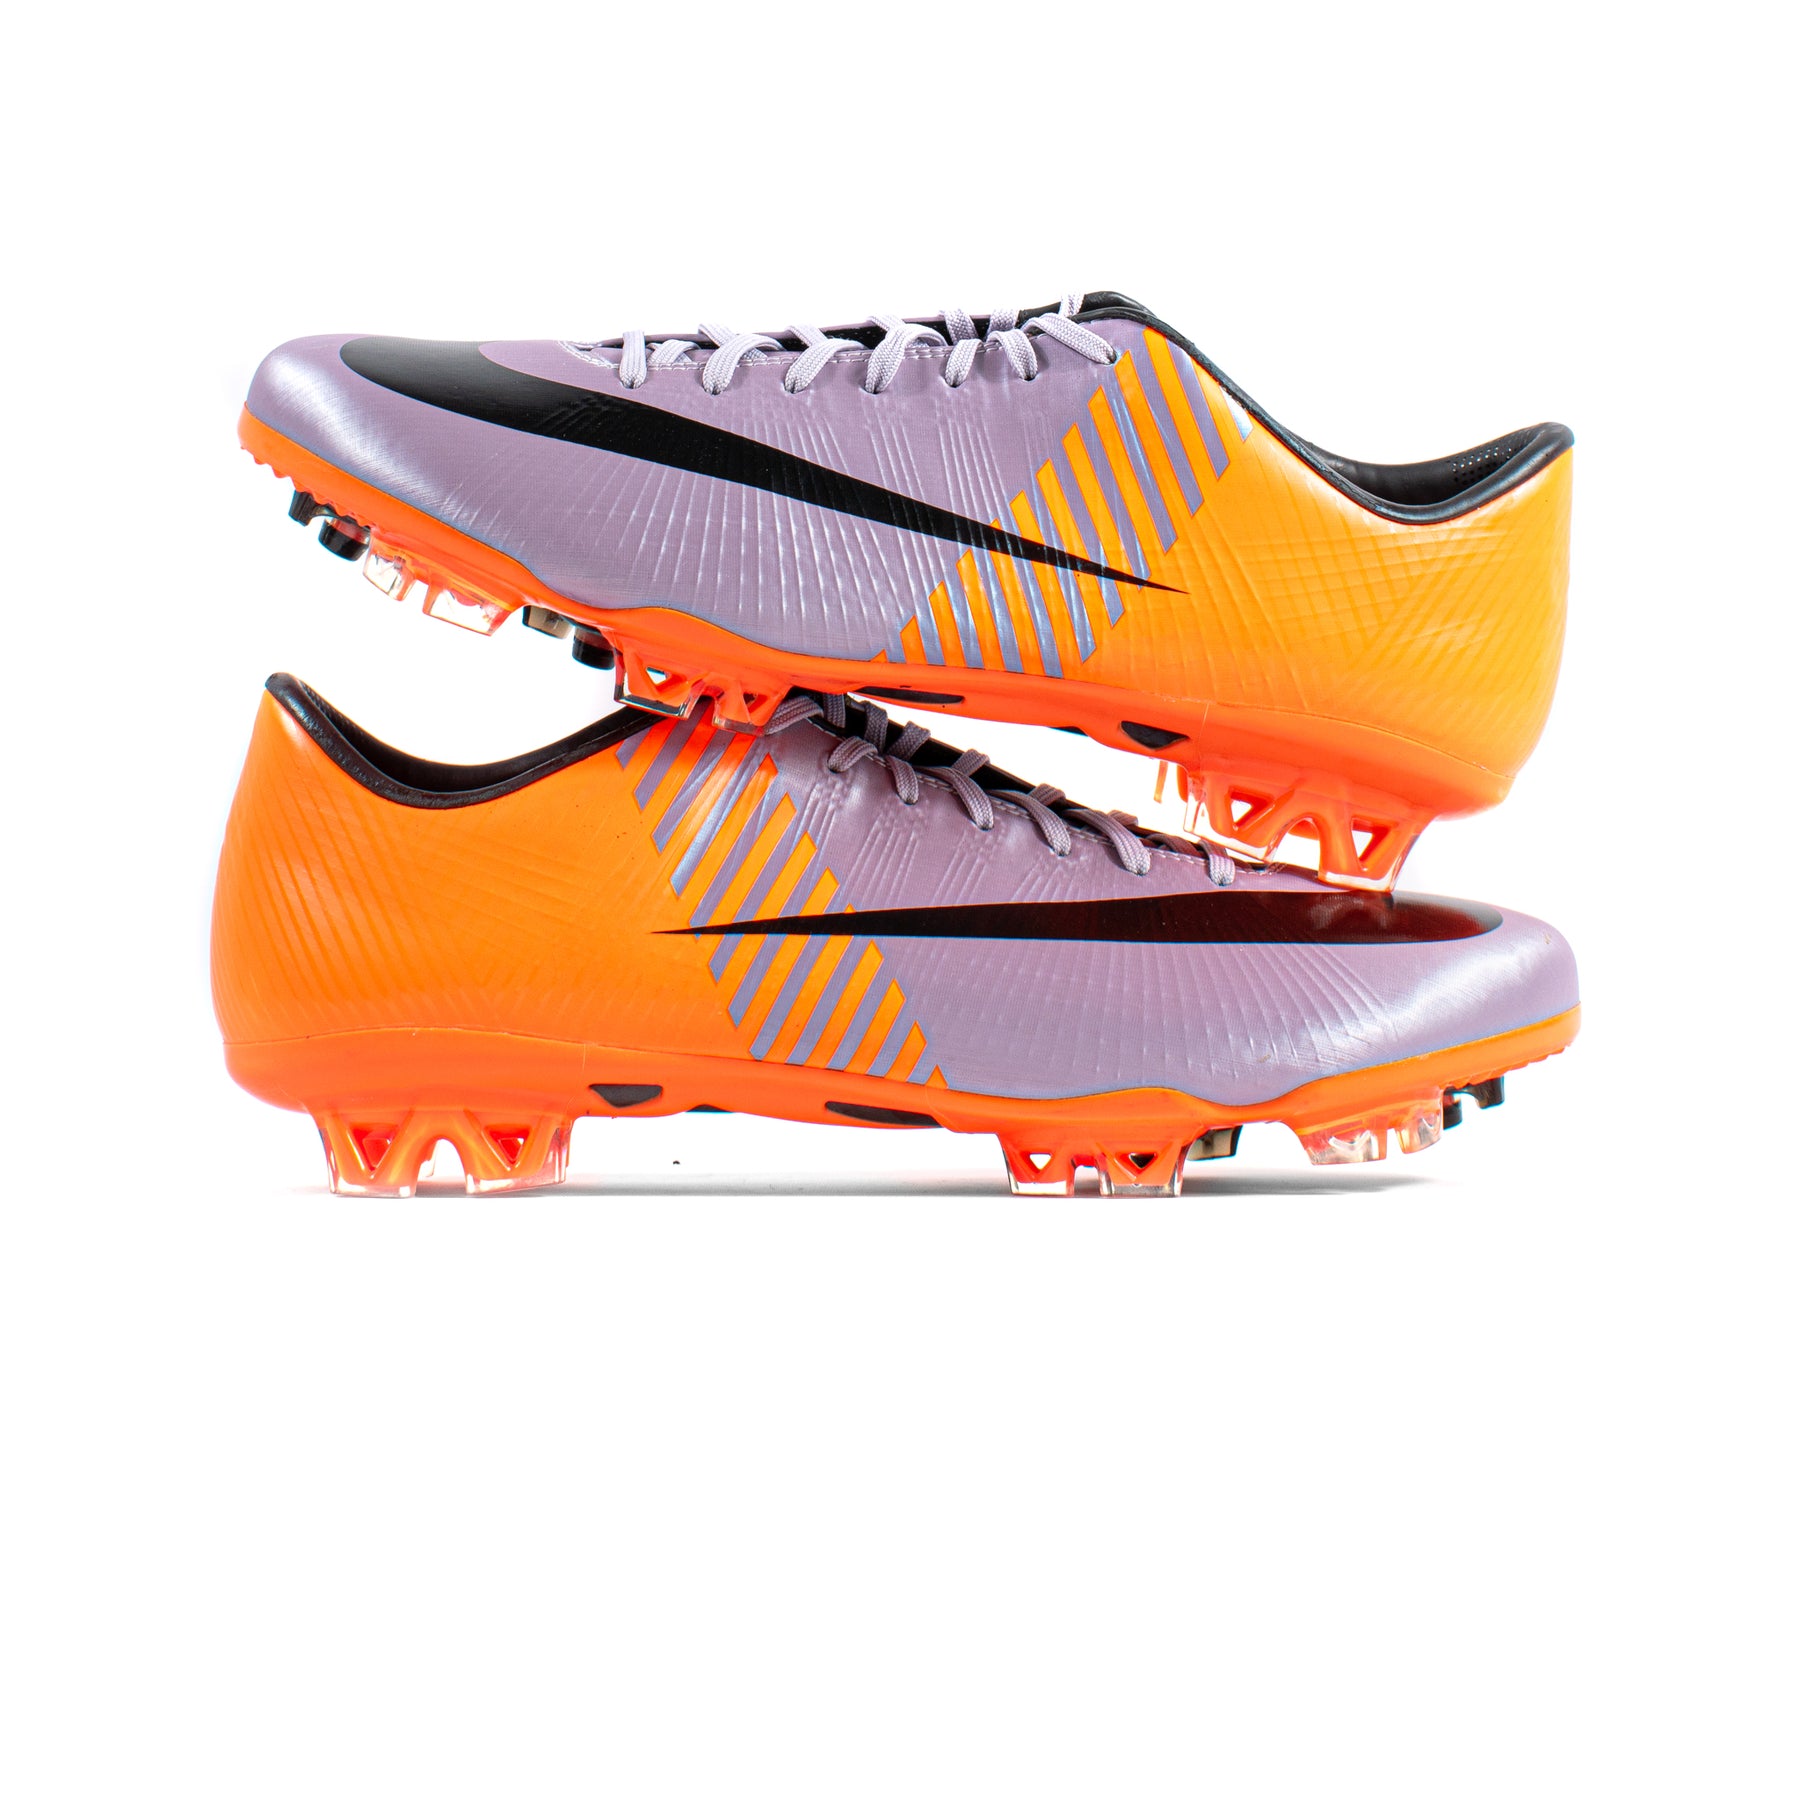 Nike Mercurial Vapor Superfly II World Cup 2010 FG – Soccer Cleats